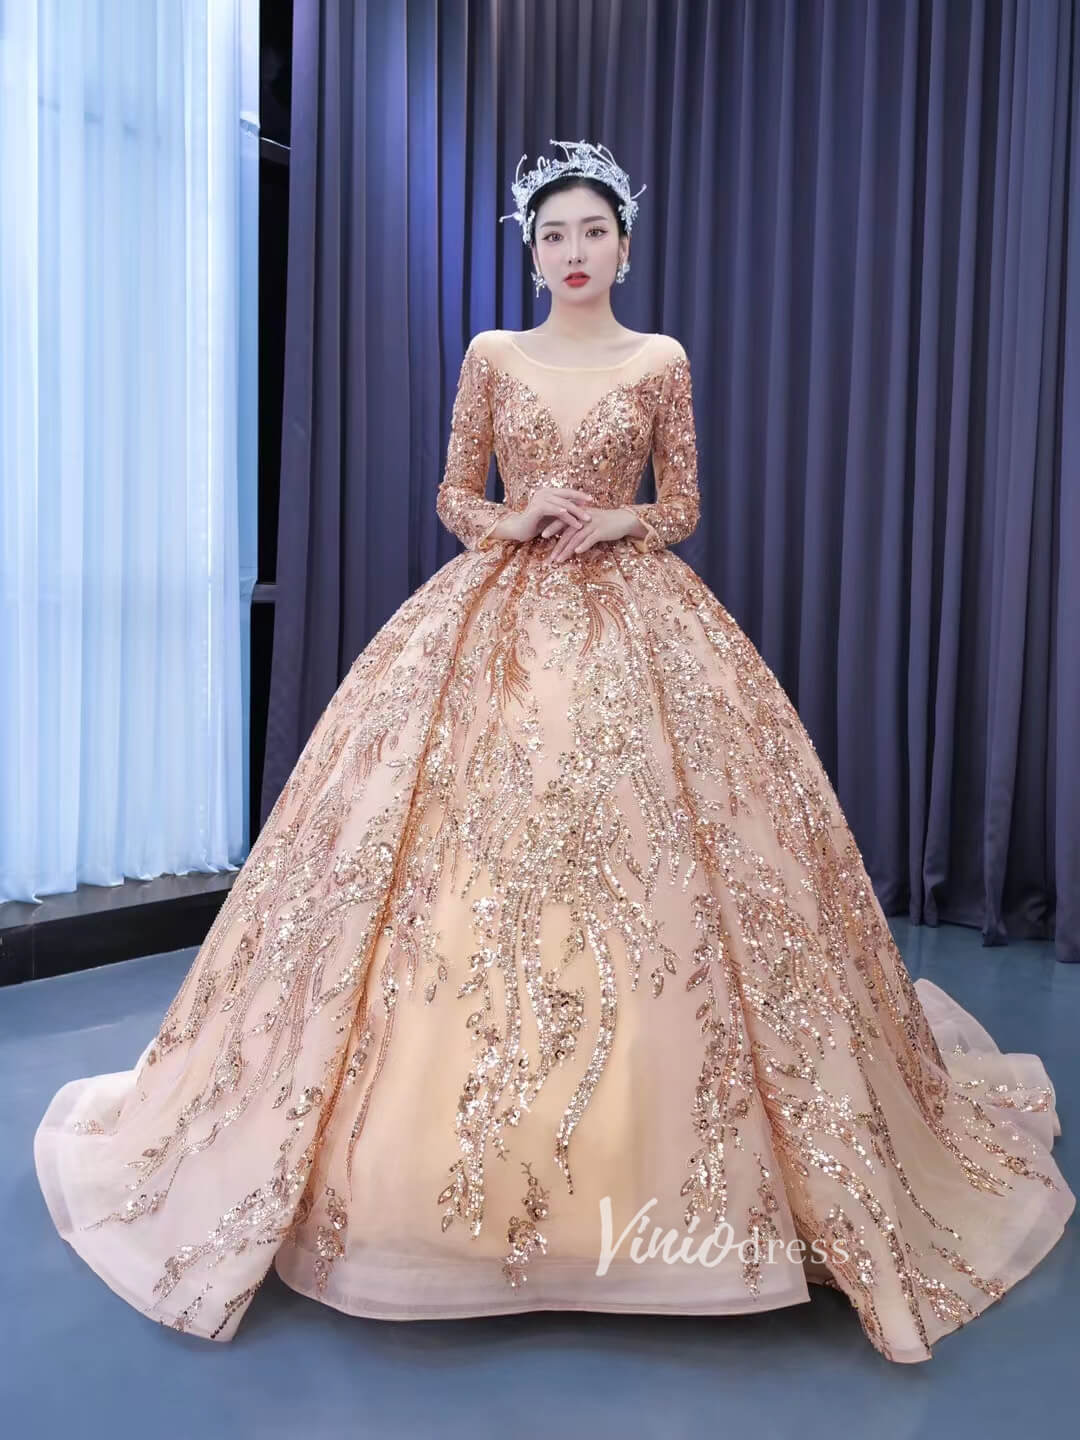 Top more than 157 gowns and roses super hot